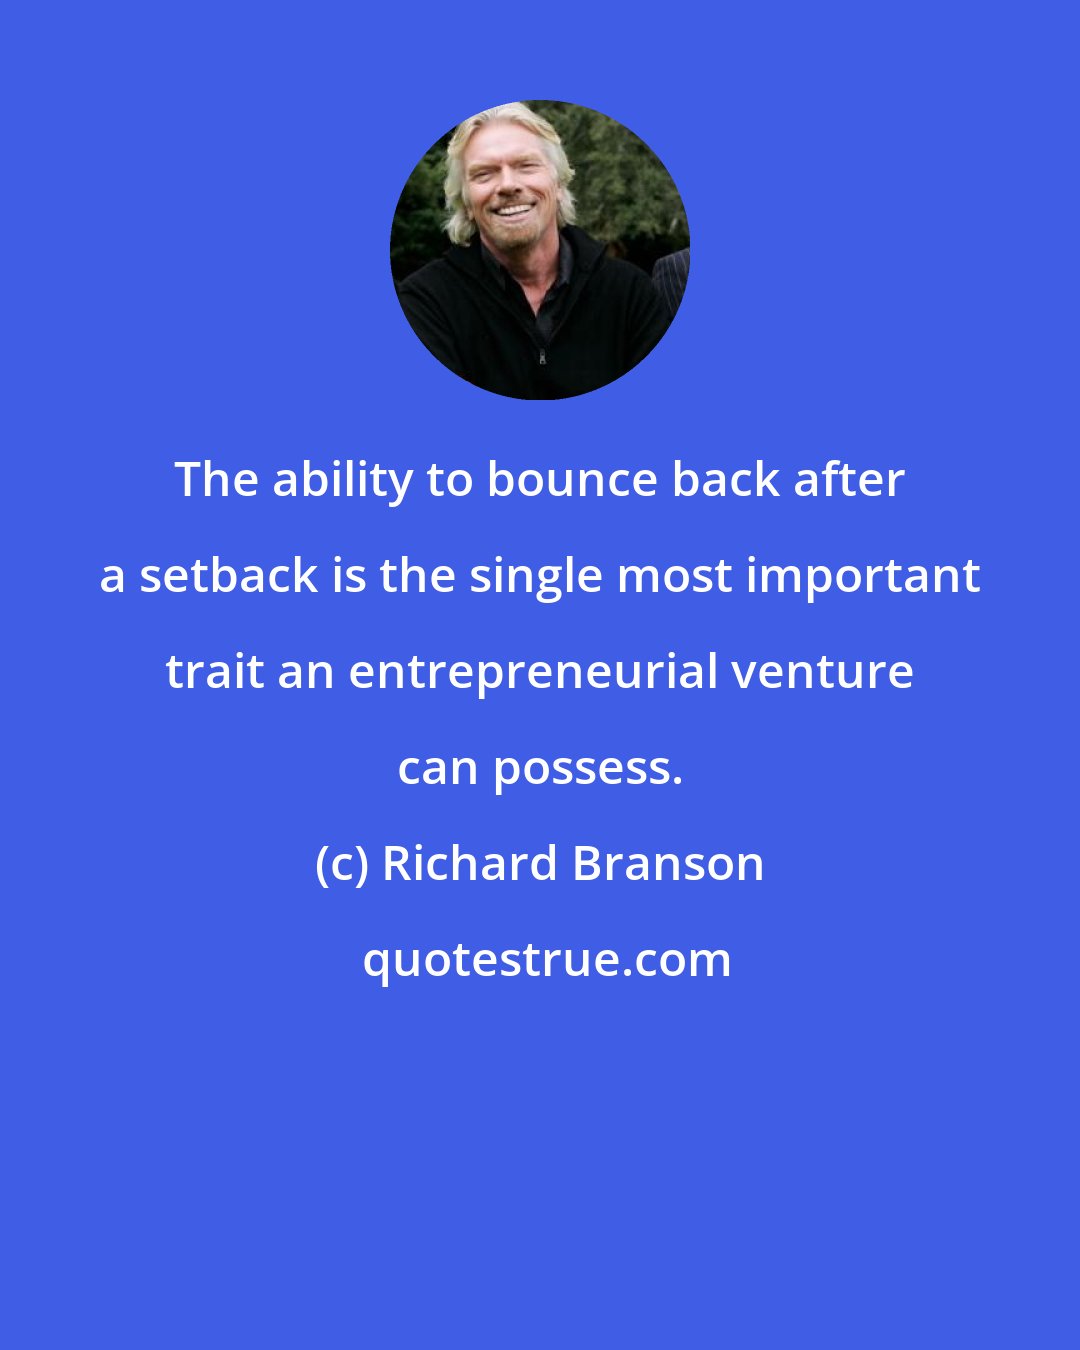 Richard Branson: The ability to bounce back after a setback is the single most important trait an entrepreneurial venture can possess.